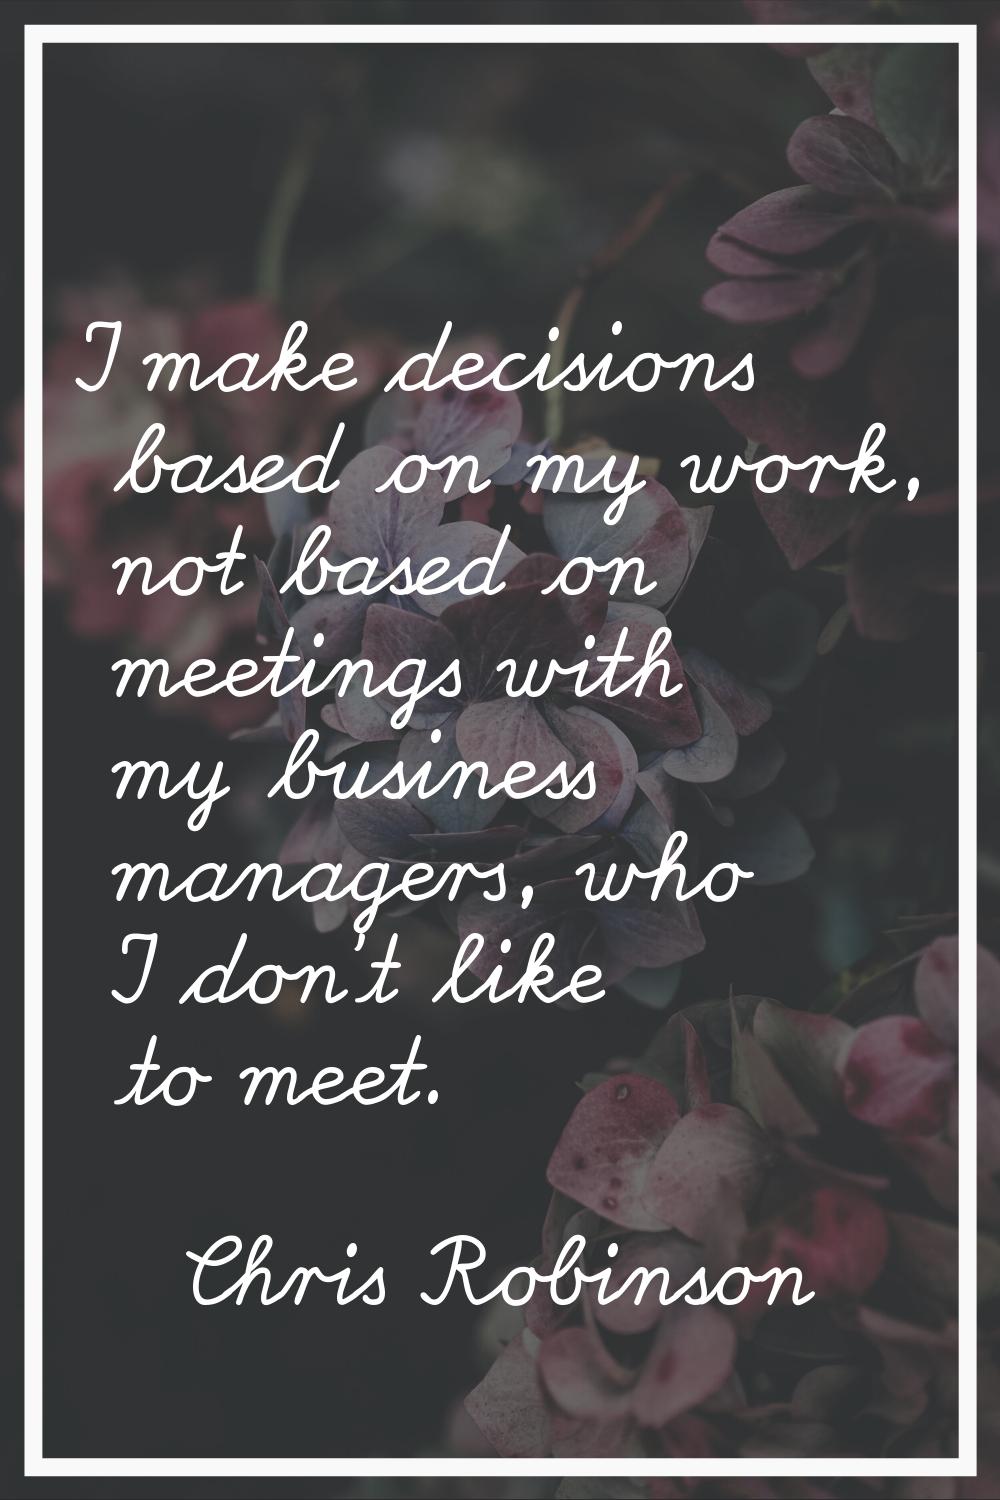 I make decisions based on my work, not based on meetings with my business managers, who I don't lik